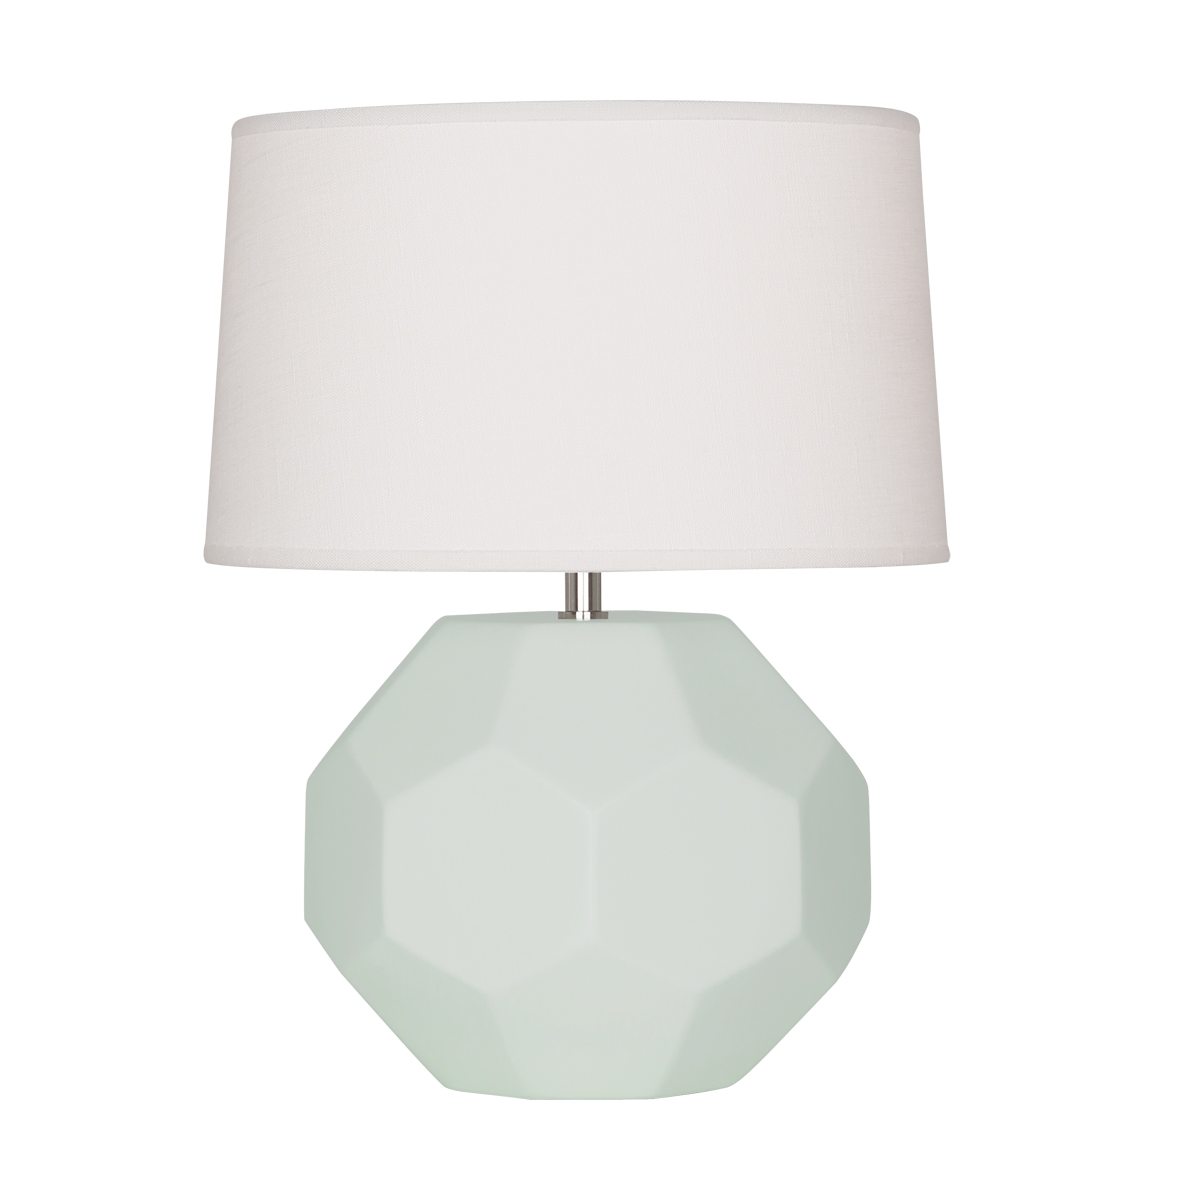 Franklin Accent Lamp Style #MCL02